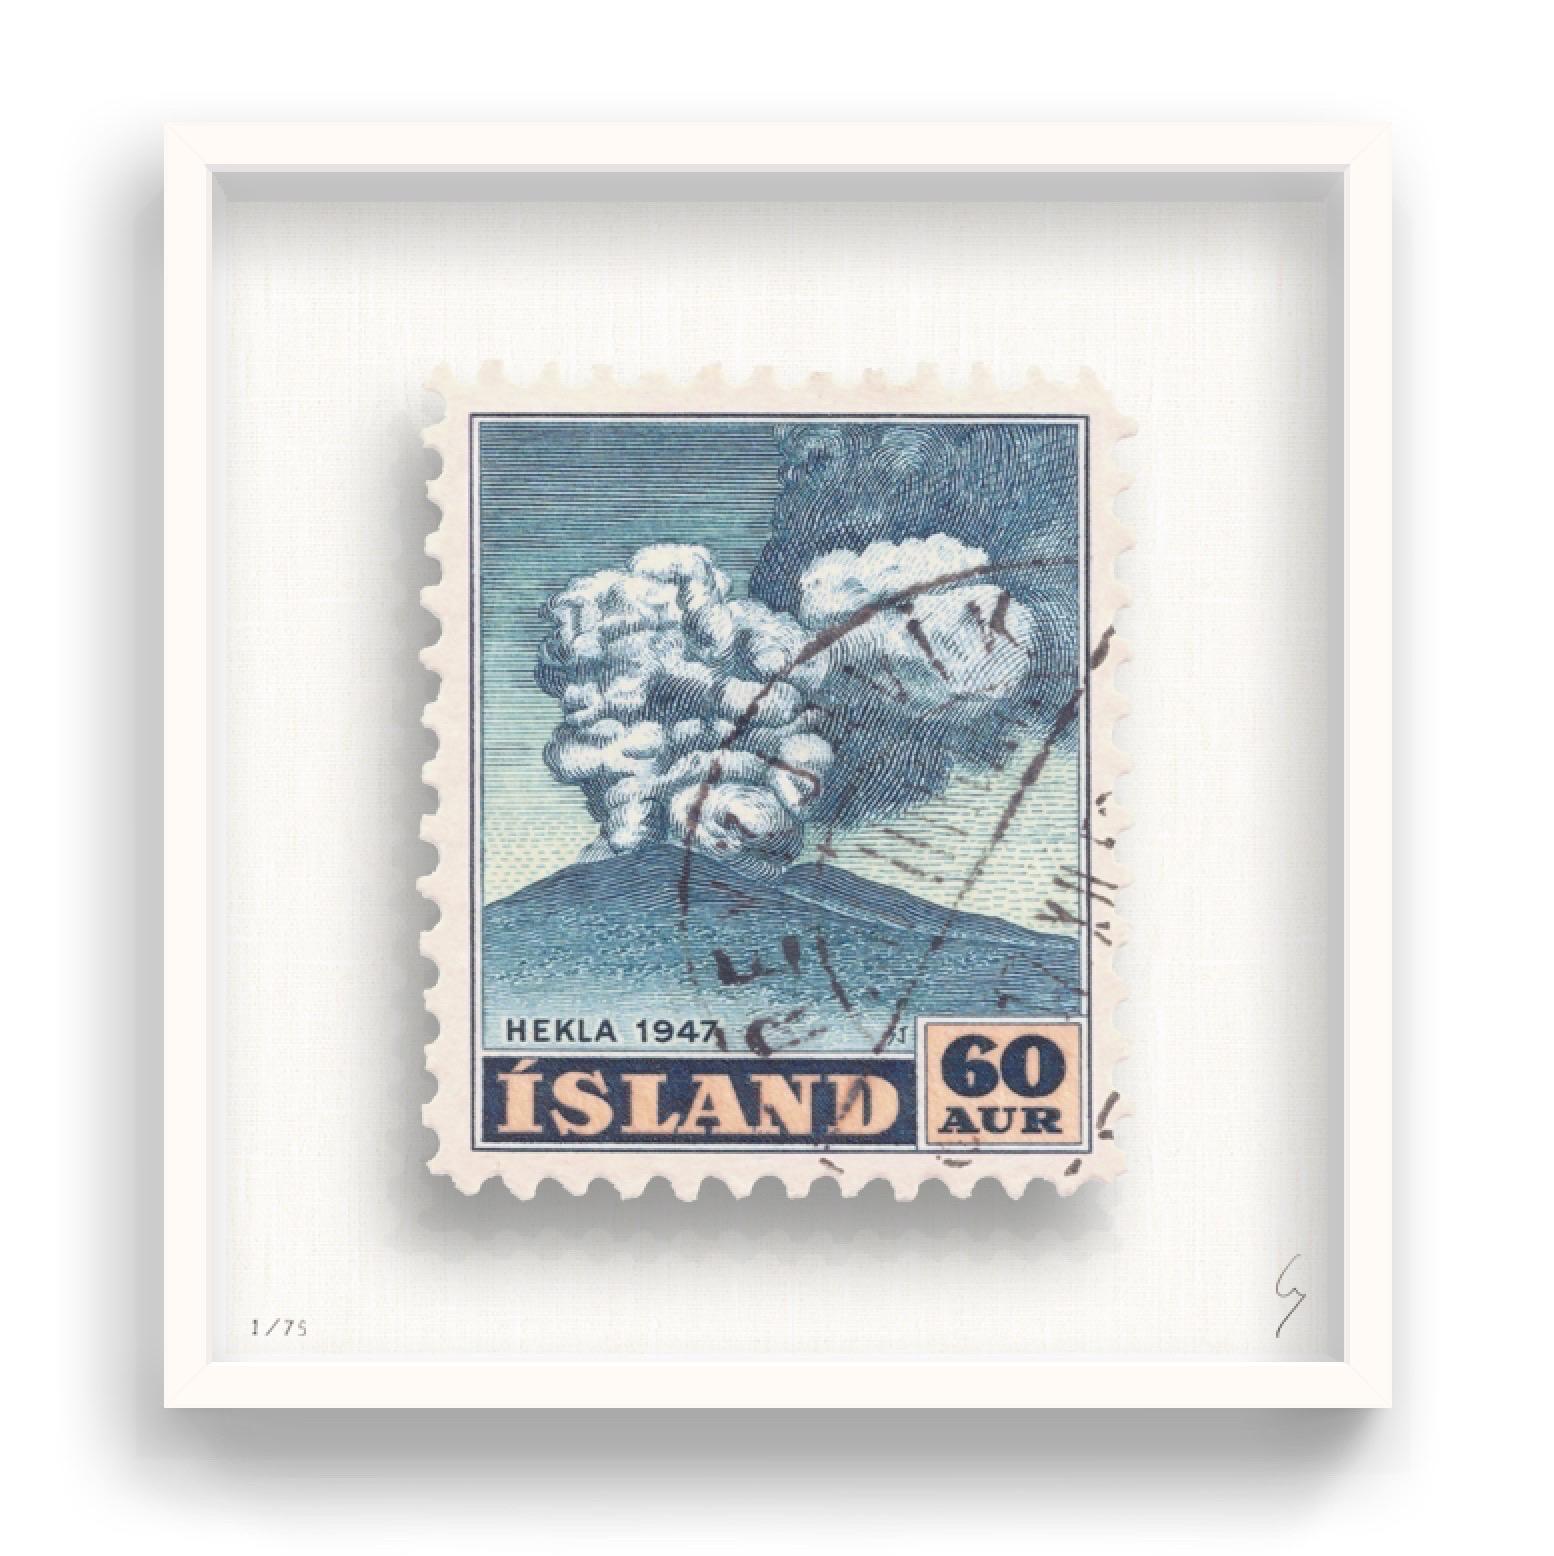 Guy Gee, Iceland (medium)

Hand-engraved print on 350gsm on G.F Smith card
53 x 56cm (20 4/5 x 22 2/5 in)
Frame included 
Edition of 75 

Each artwork by Guy had been digitally reimagined from an original postage stamp. Cut out and finished by hand,